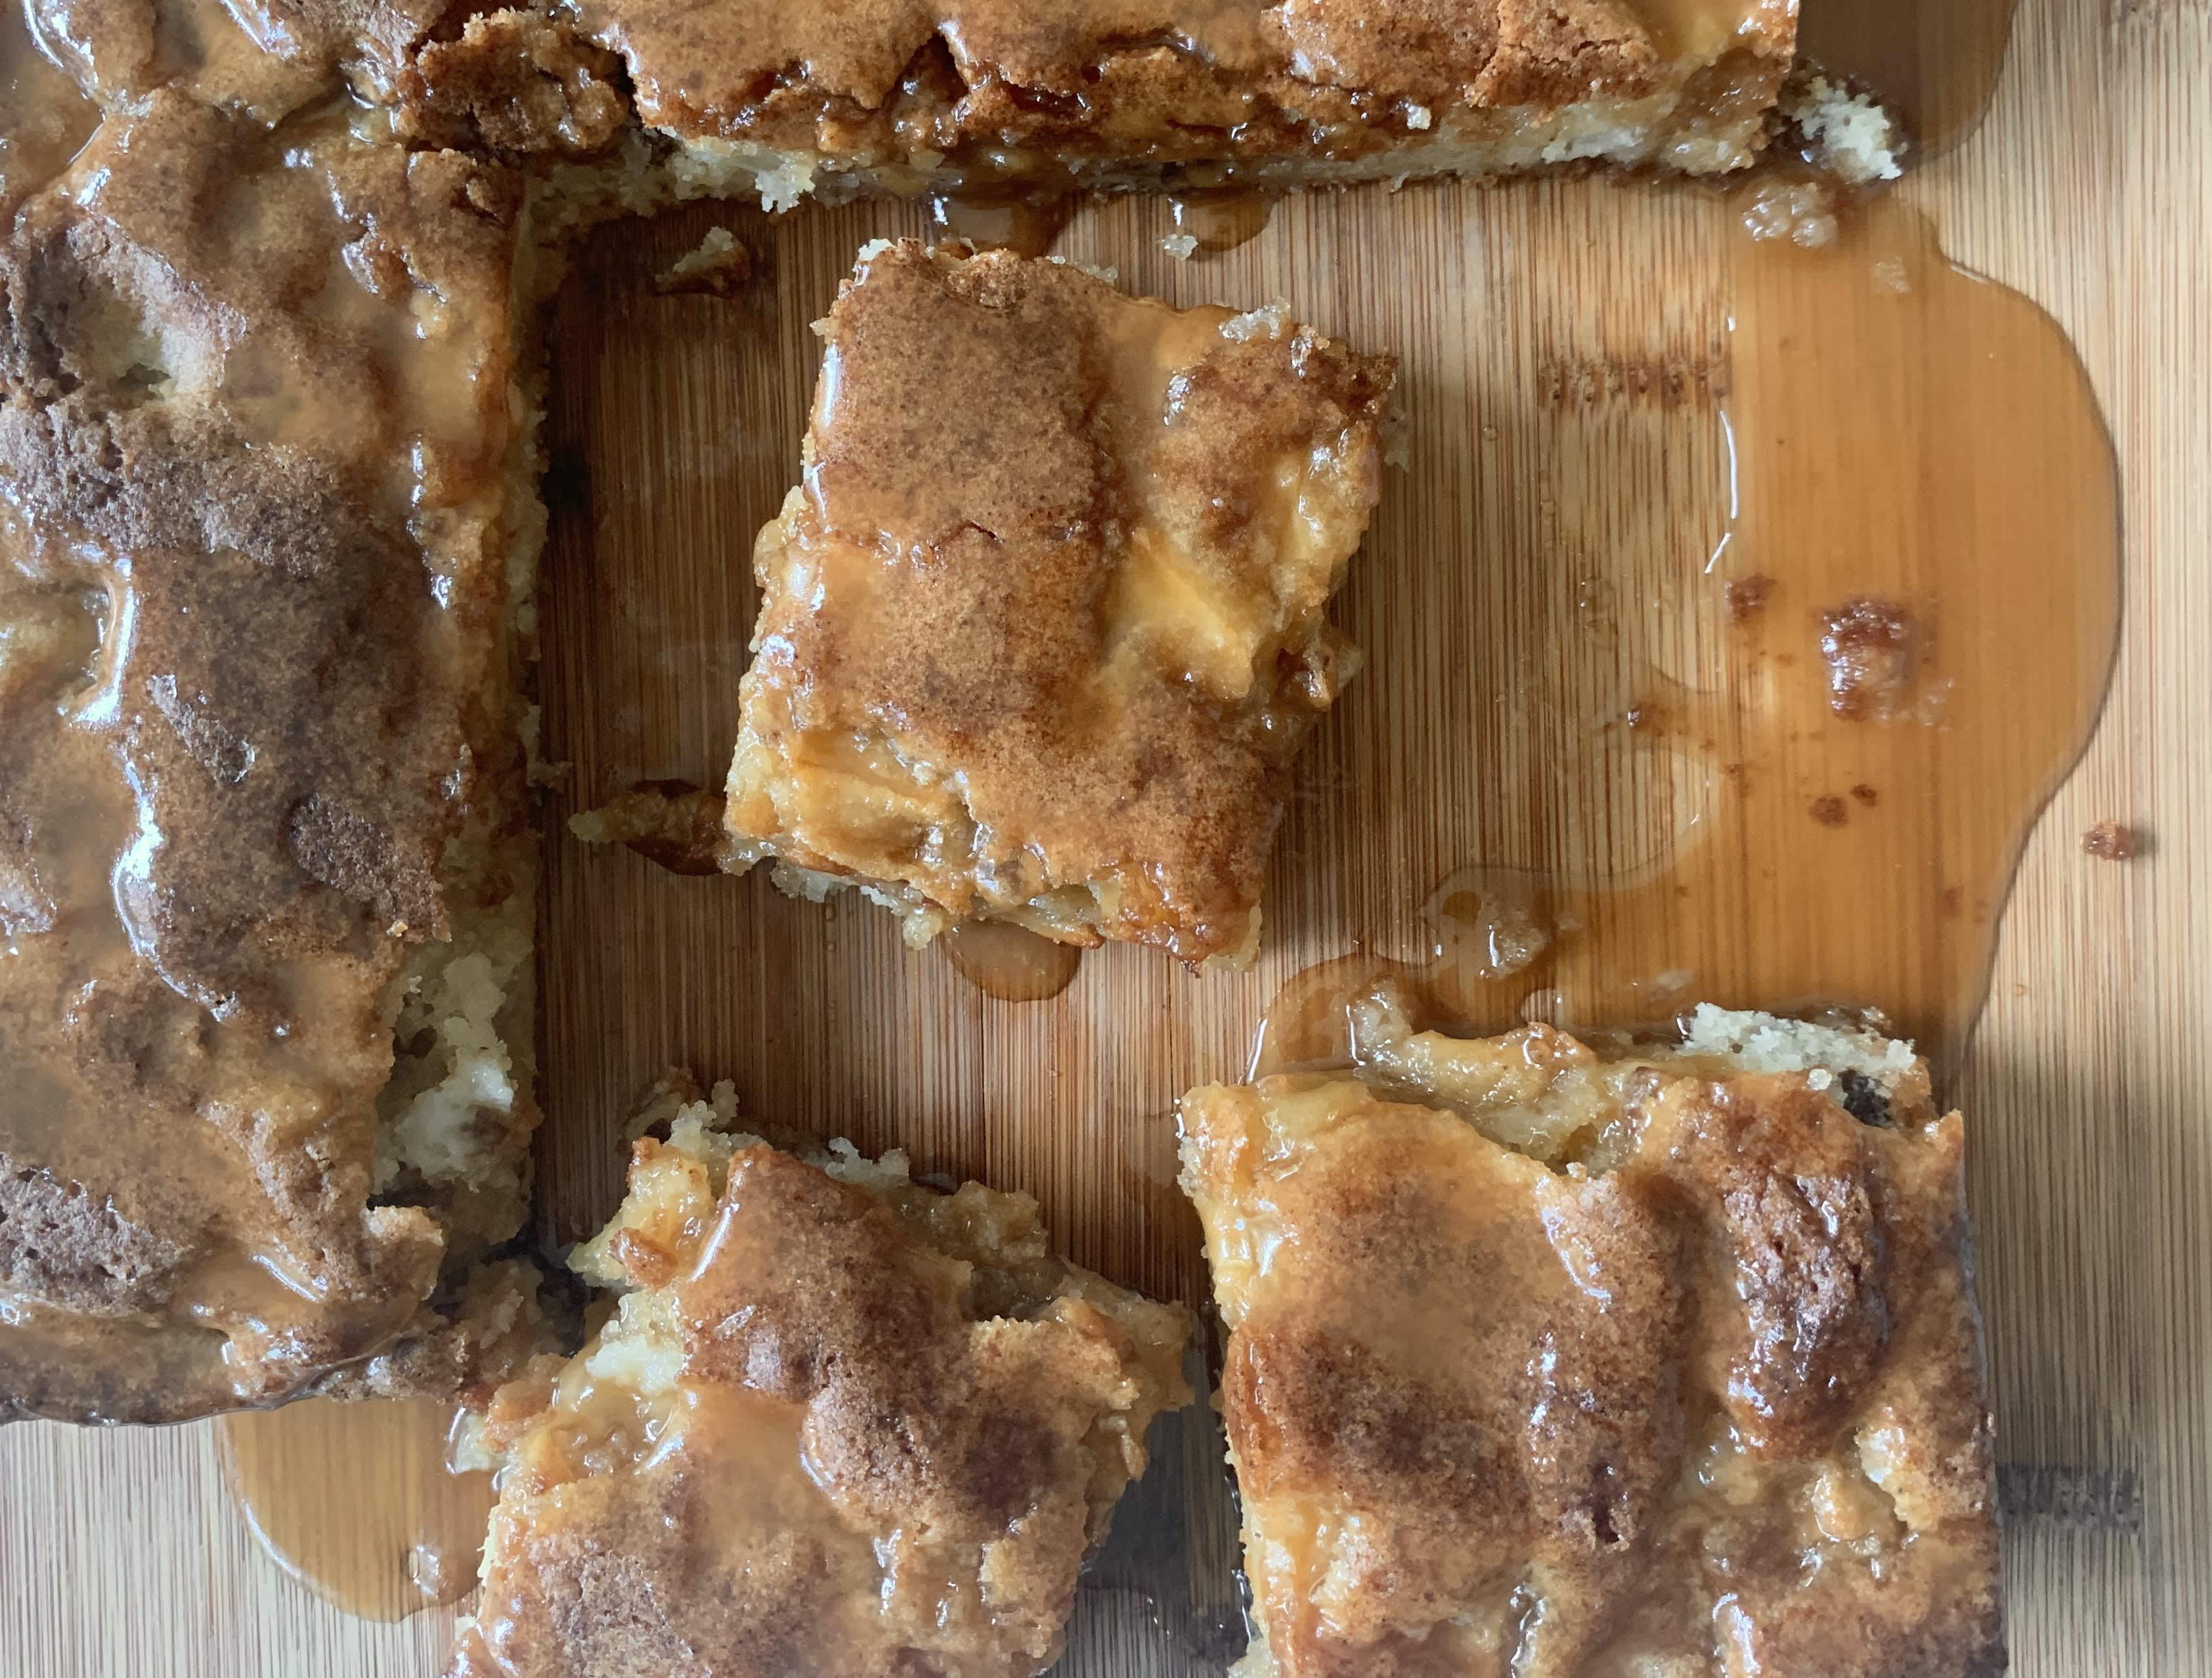 Easy-as-Pie Apple Cake Recipe - NYT Cooking